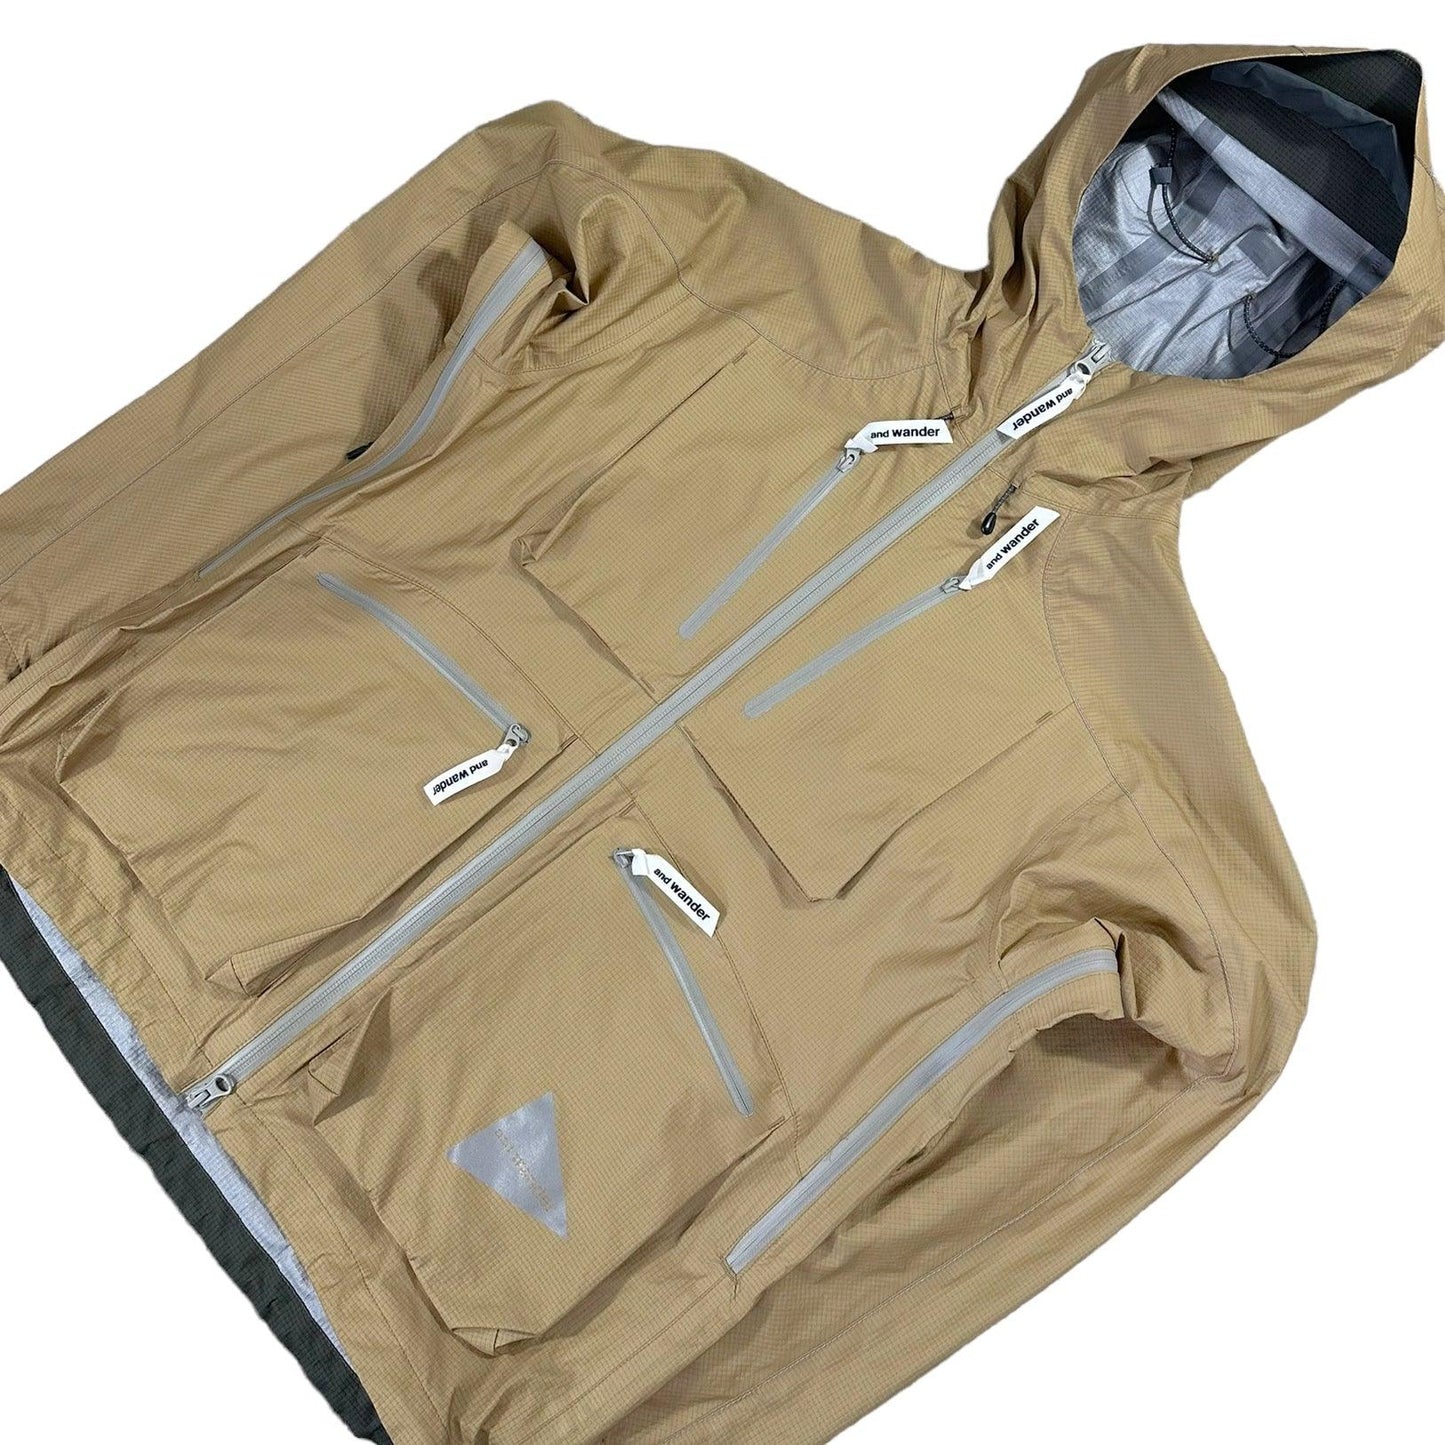 And Wander Event Pertex MultiPocket Jacket with dropping pockets - Known Source